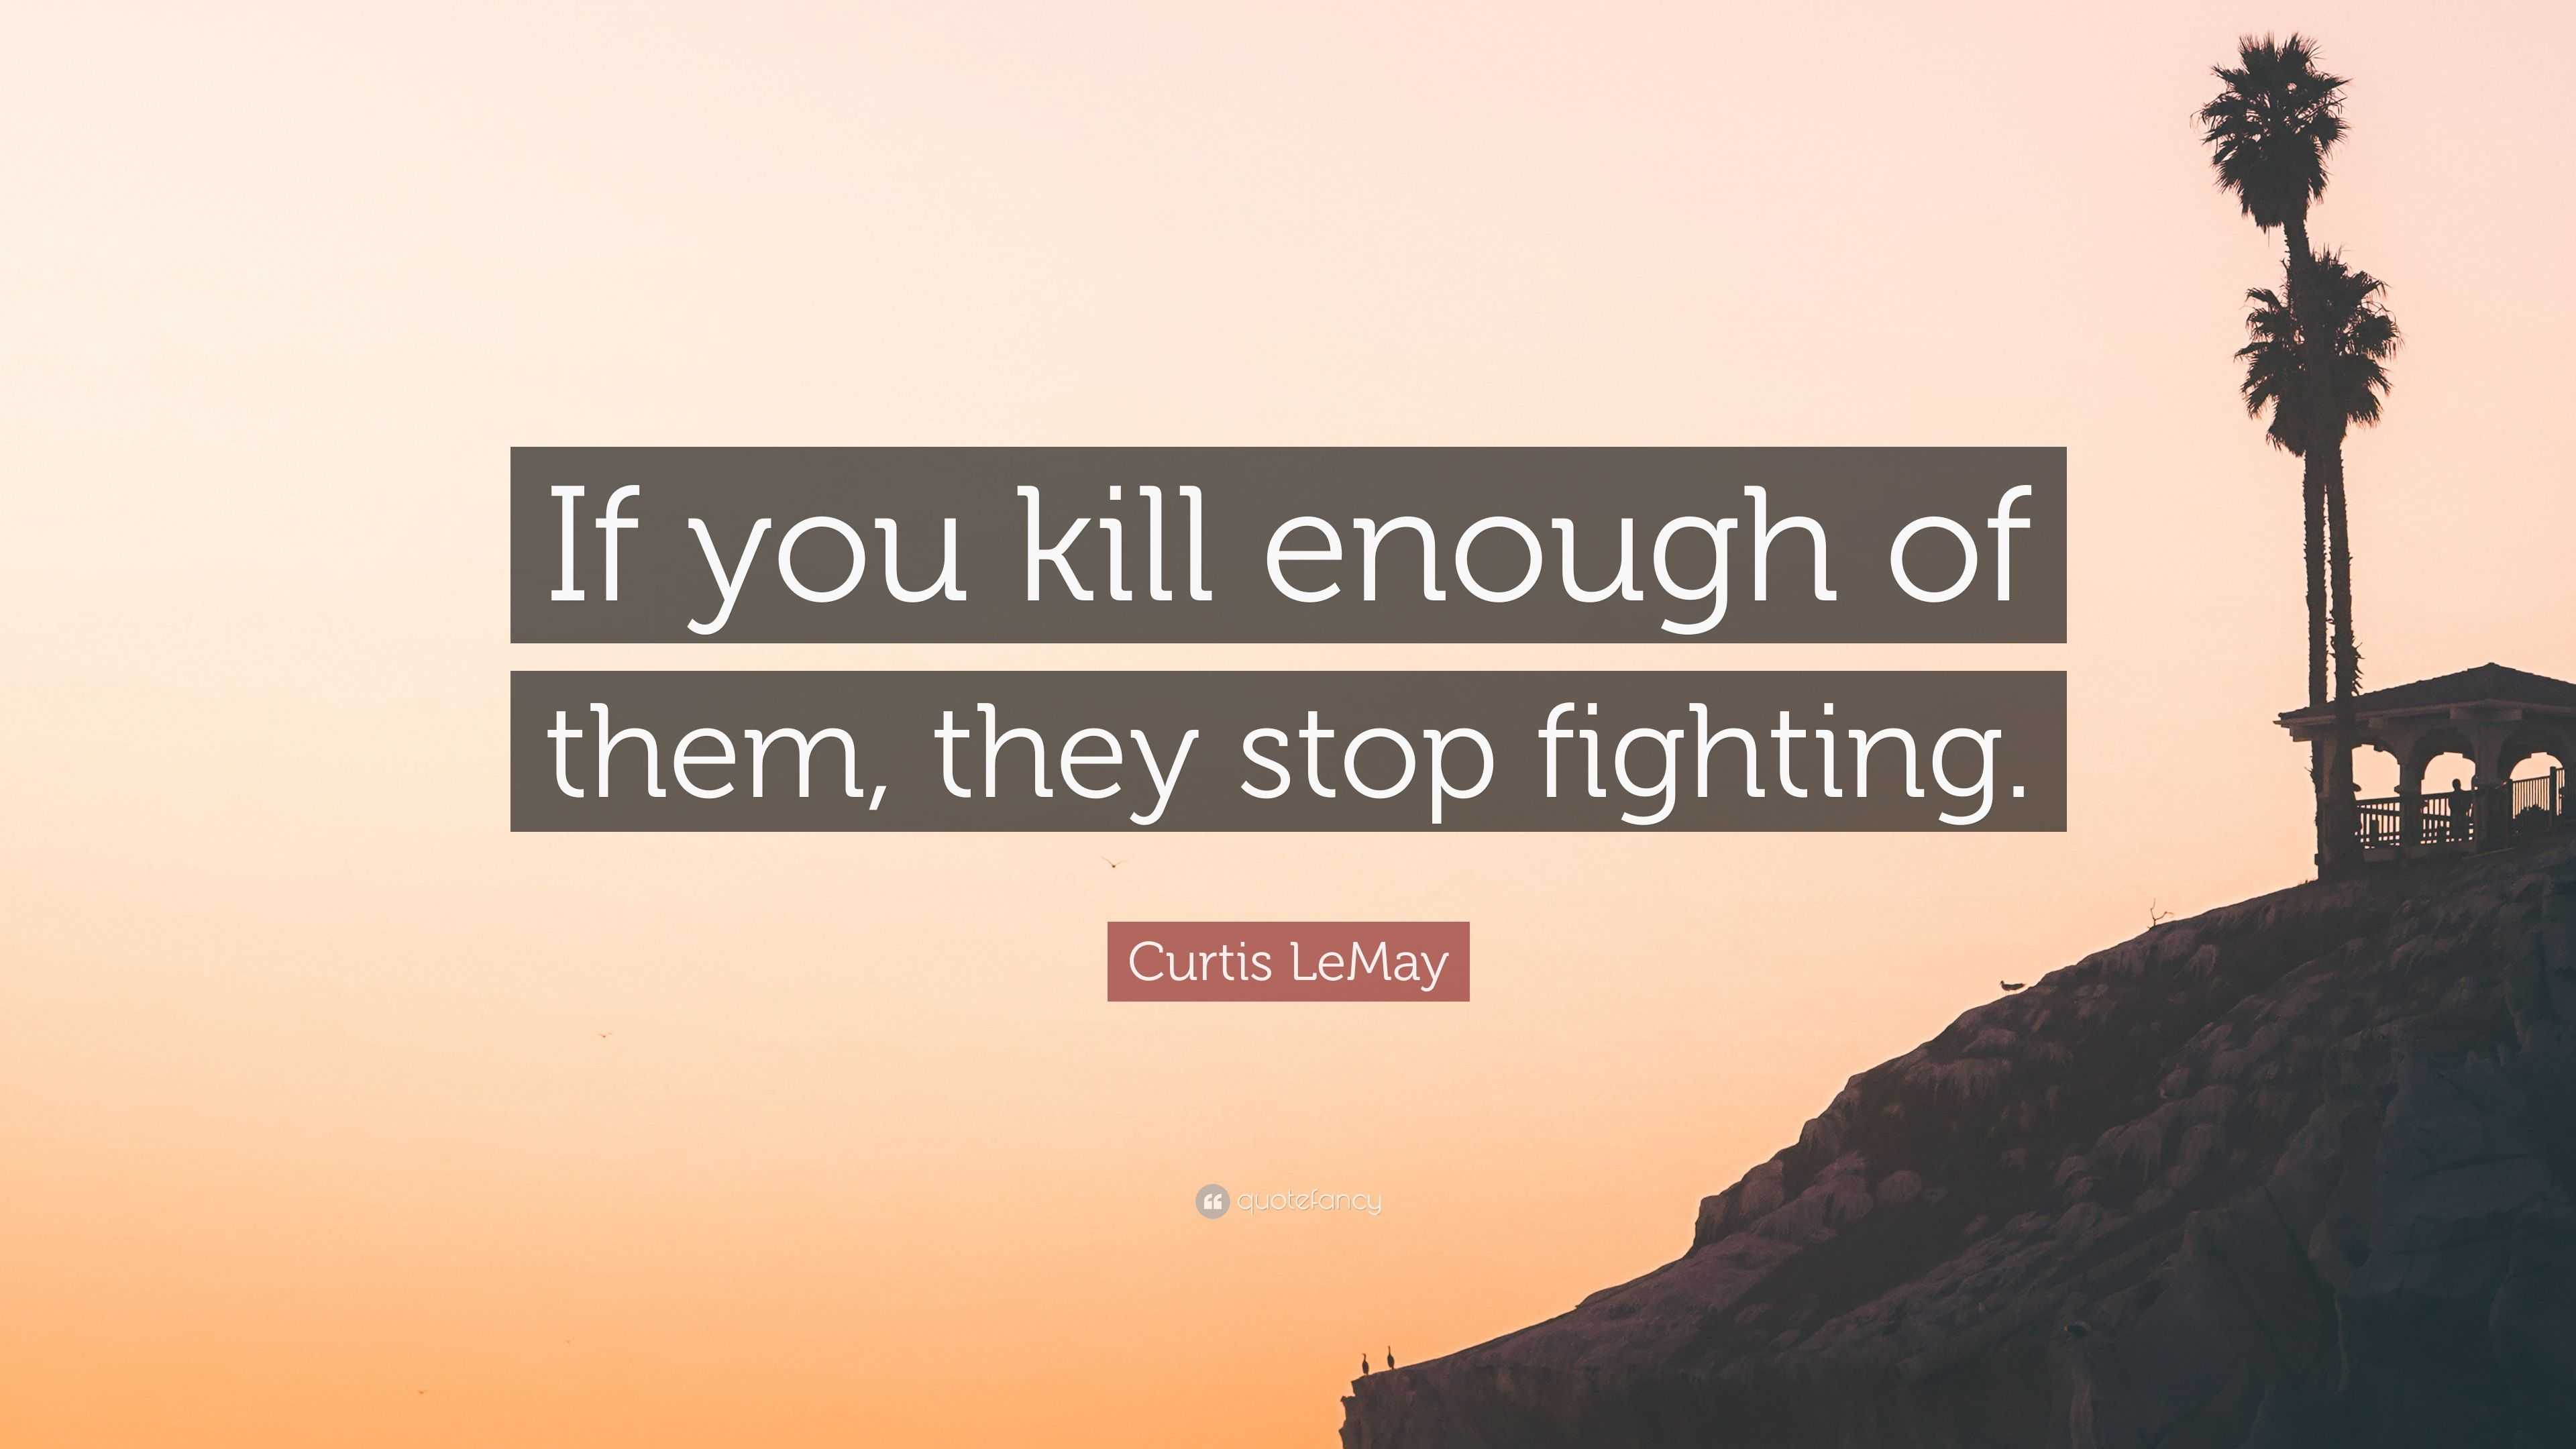 Curtis LeMay Quote: “If you kill enough of them, they stop fighting.”